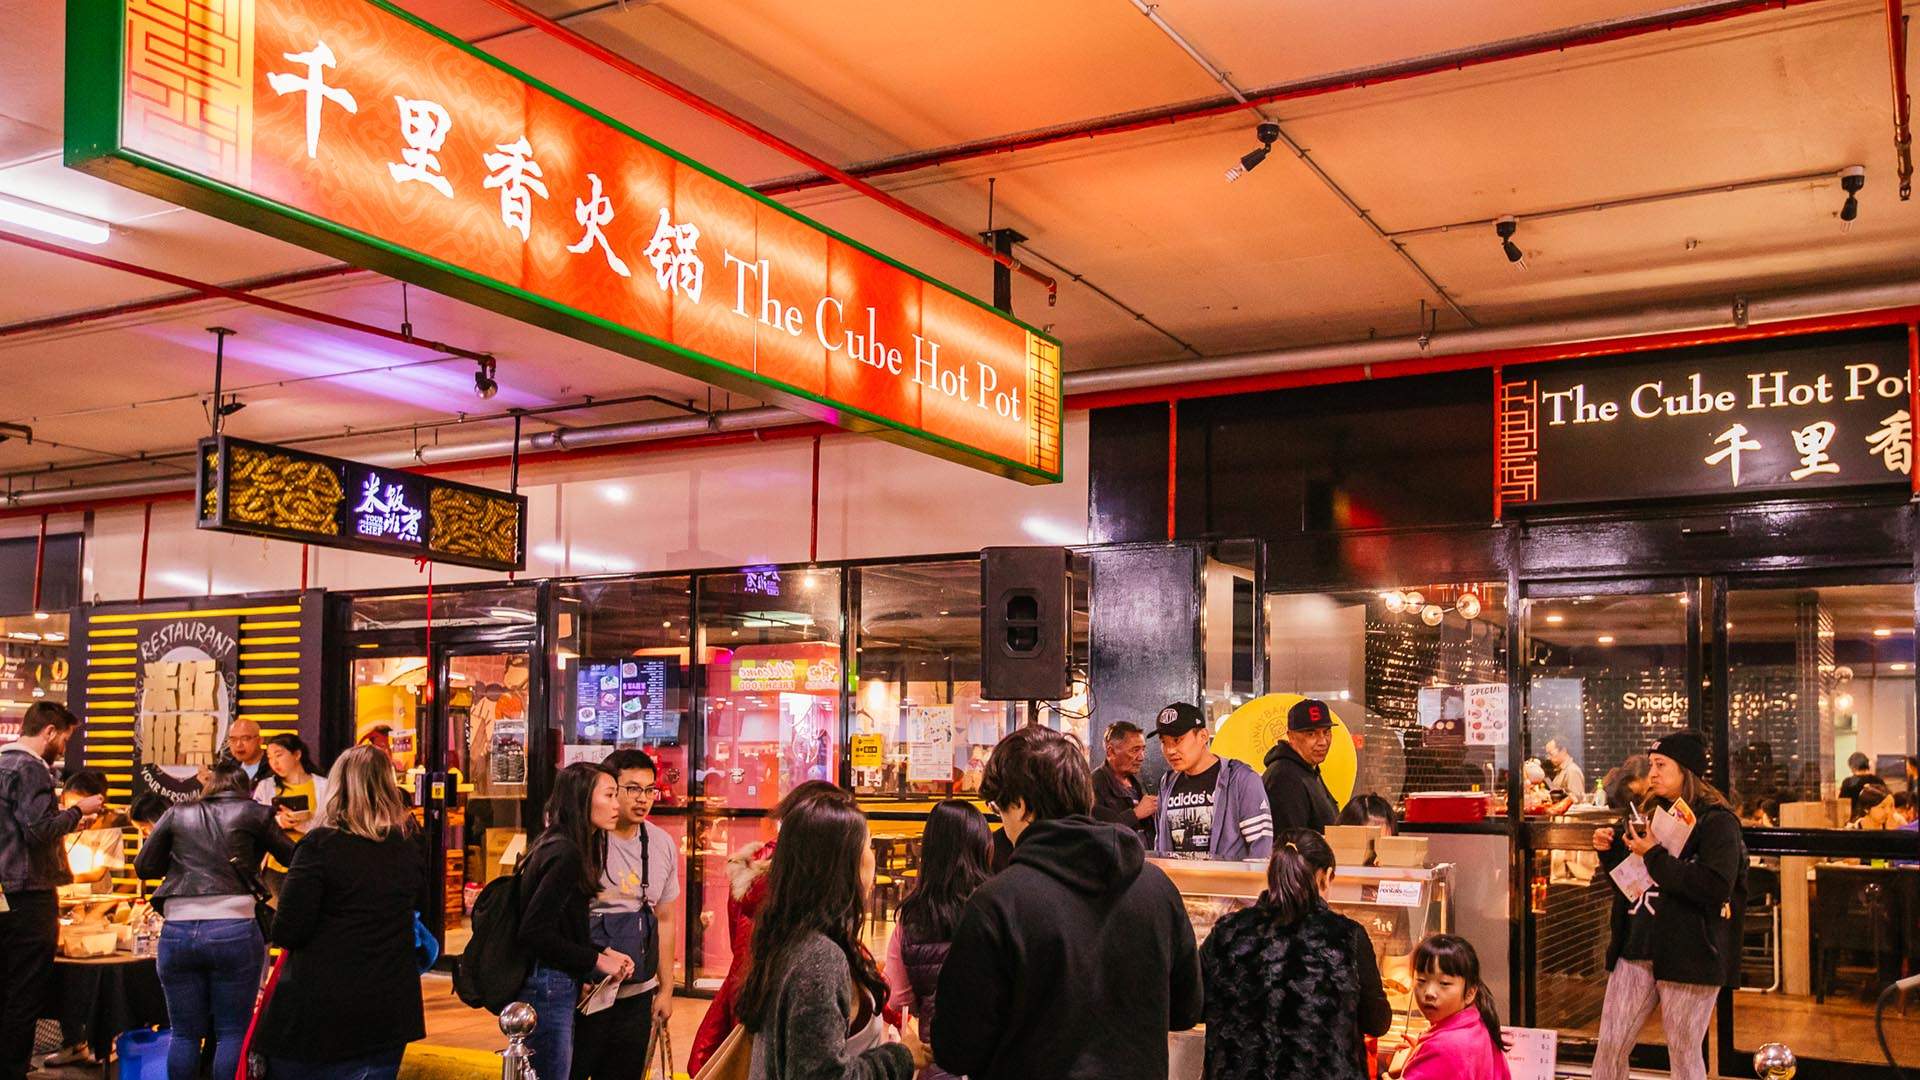 Sunnybank's Beloved Food Trail Is Returning for Its Tenth Edition This Winter with $2, $3 and $5 Dishes